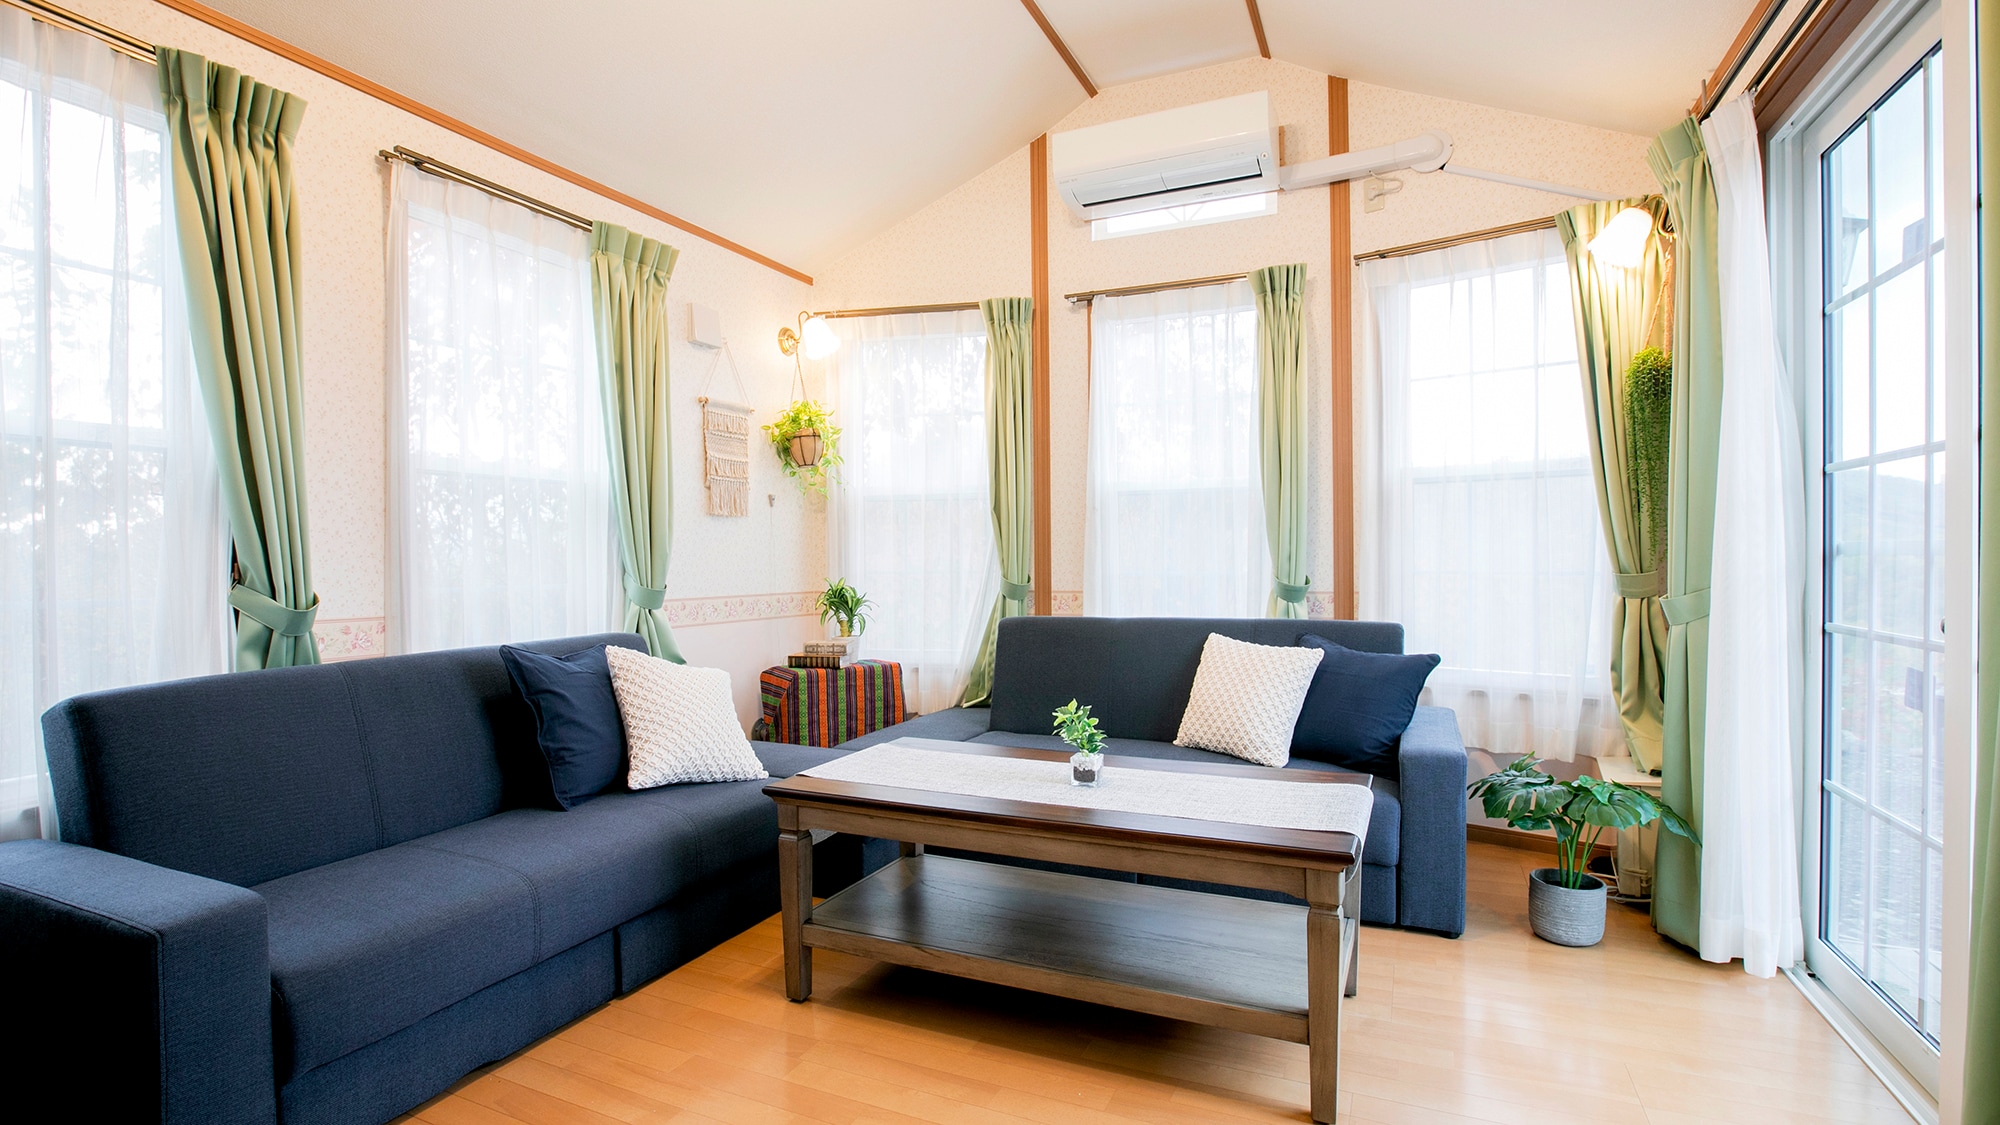 [Royal] There are 2 bedrooms ☆ An elegant time on the wooden deck directly from the room. Of course, the bathroom is separate ♪